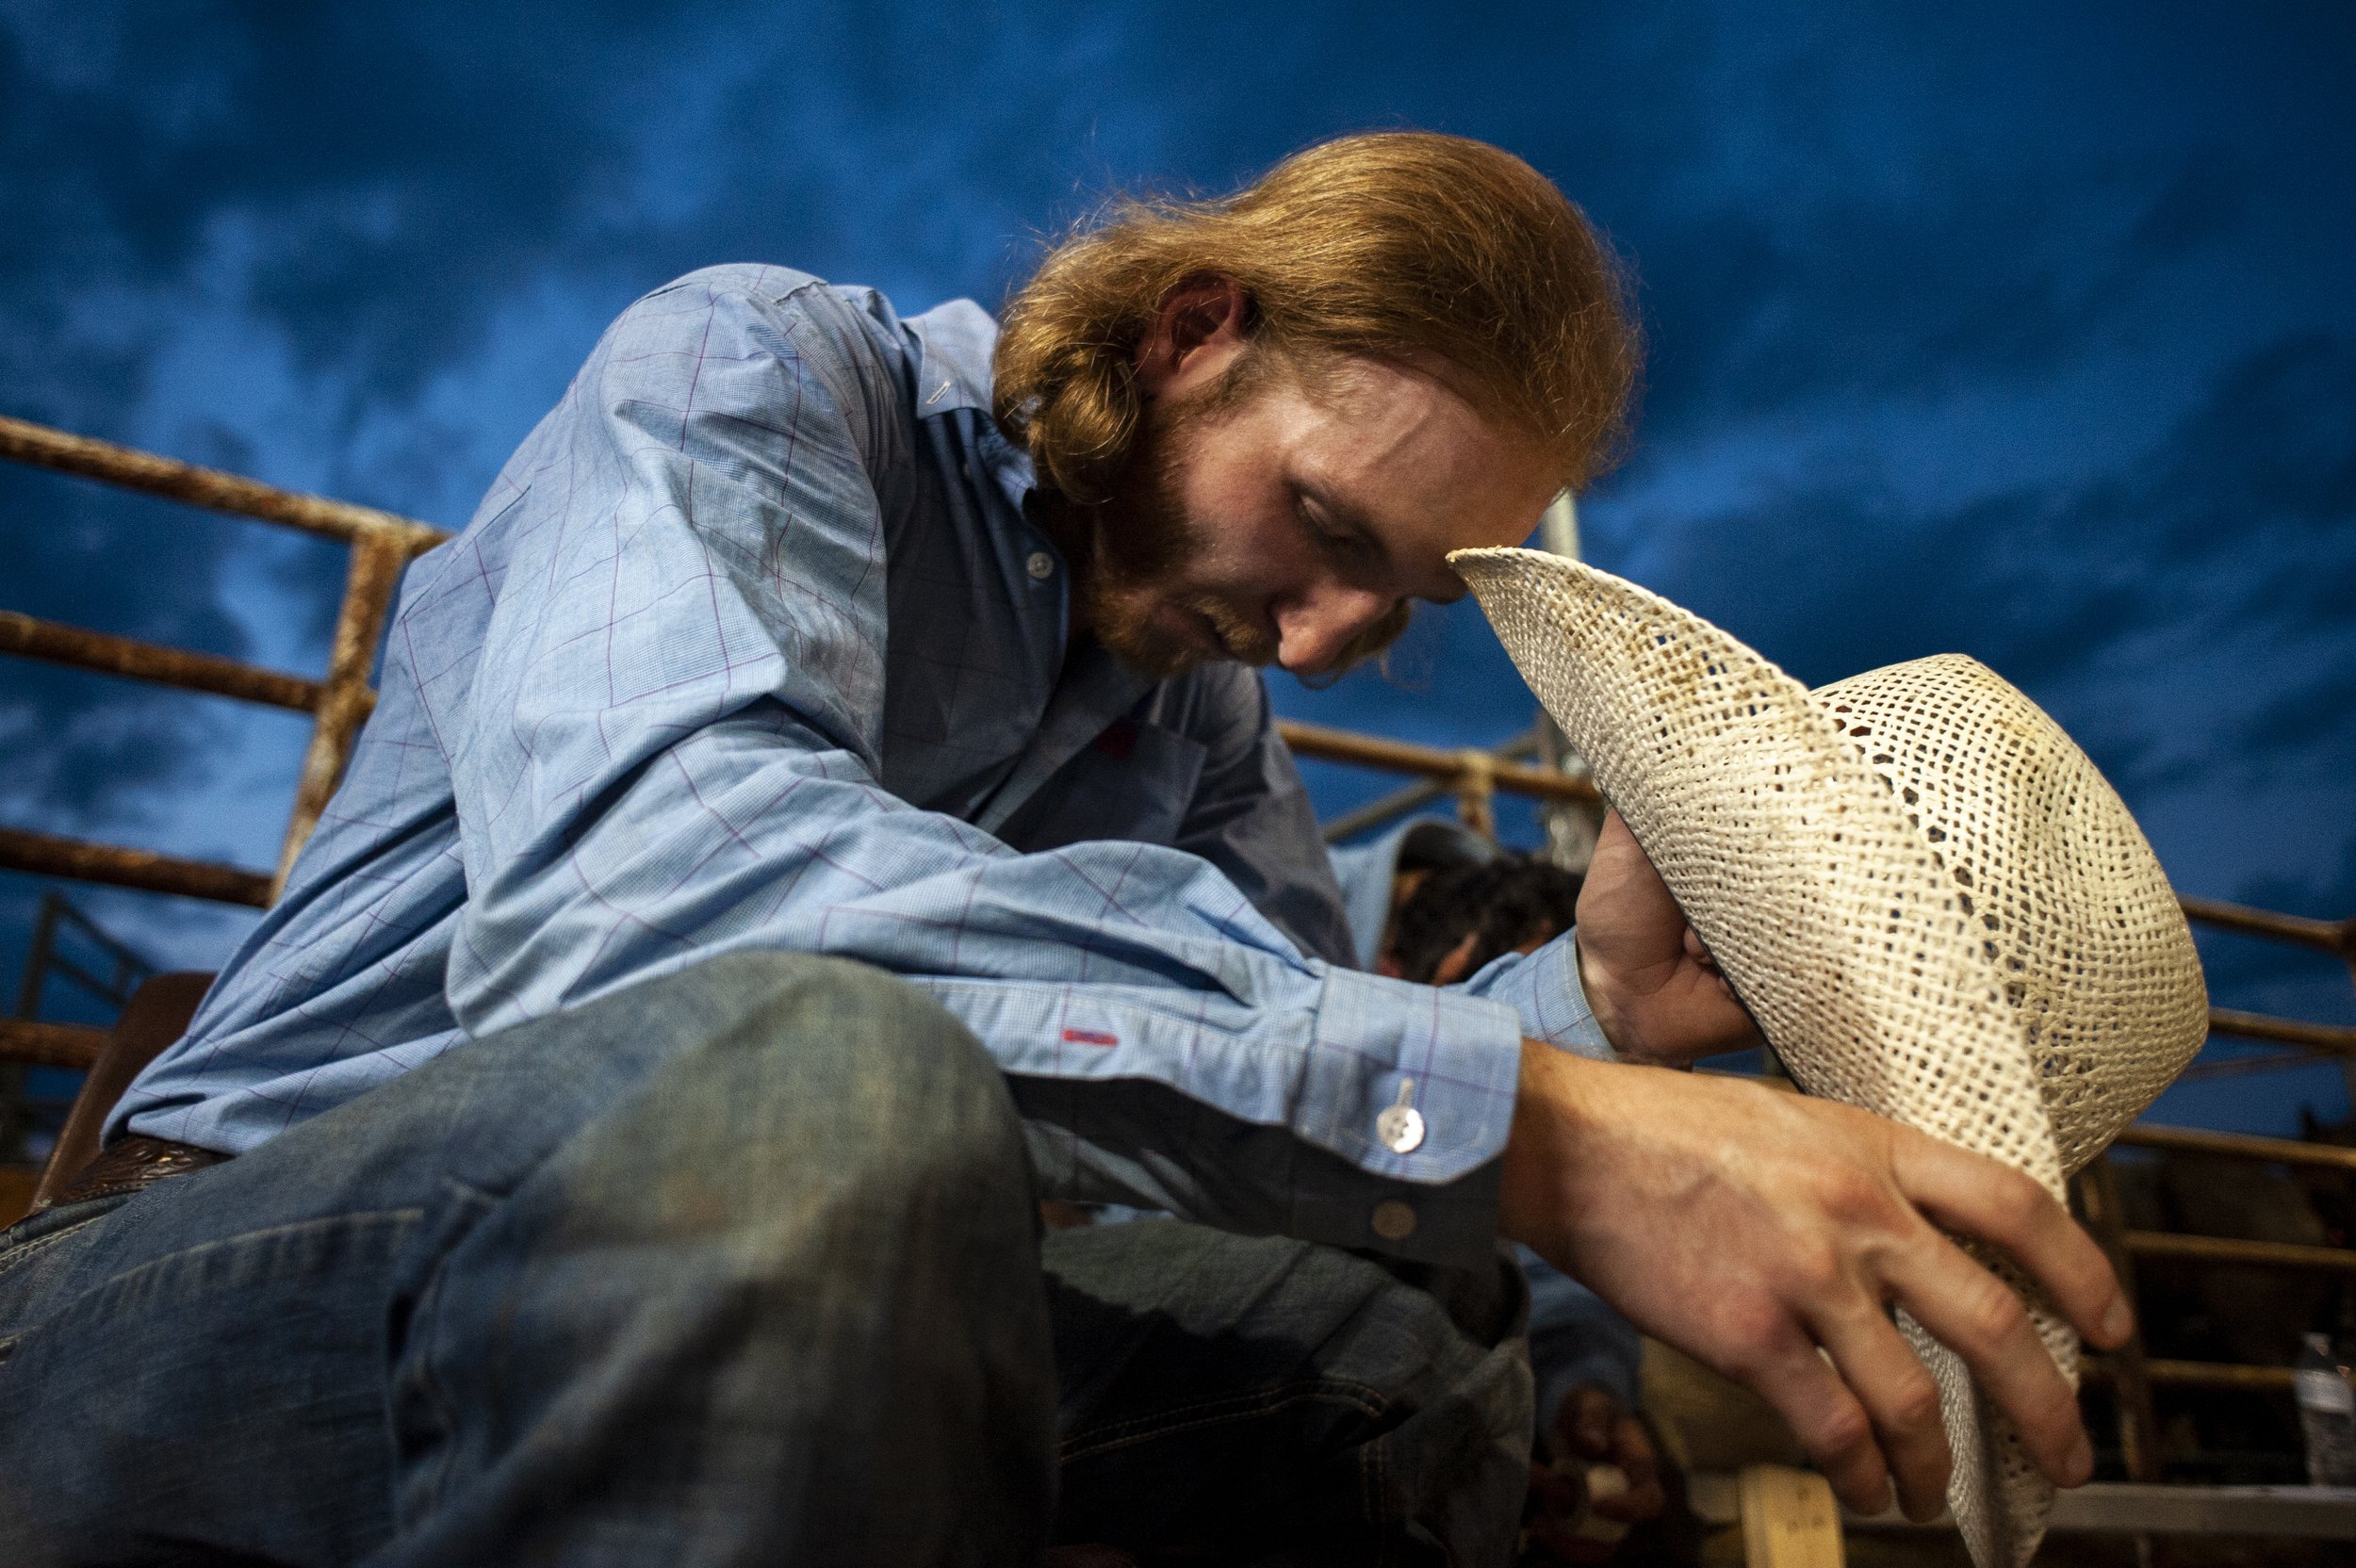  Gray Essary, of Somerville, Tennessee, bows his head in prayer before his bull ride during the Lawrence County PRCA Rodeo on Aug. 18 at Lawrence County Fairgrounds in Imboden, Arkansas.  The 23-year-old, who makes a living traveling “coast to coast,